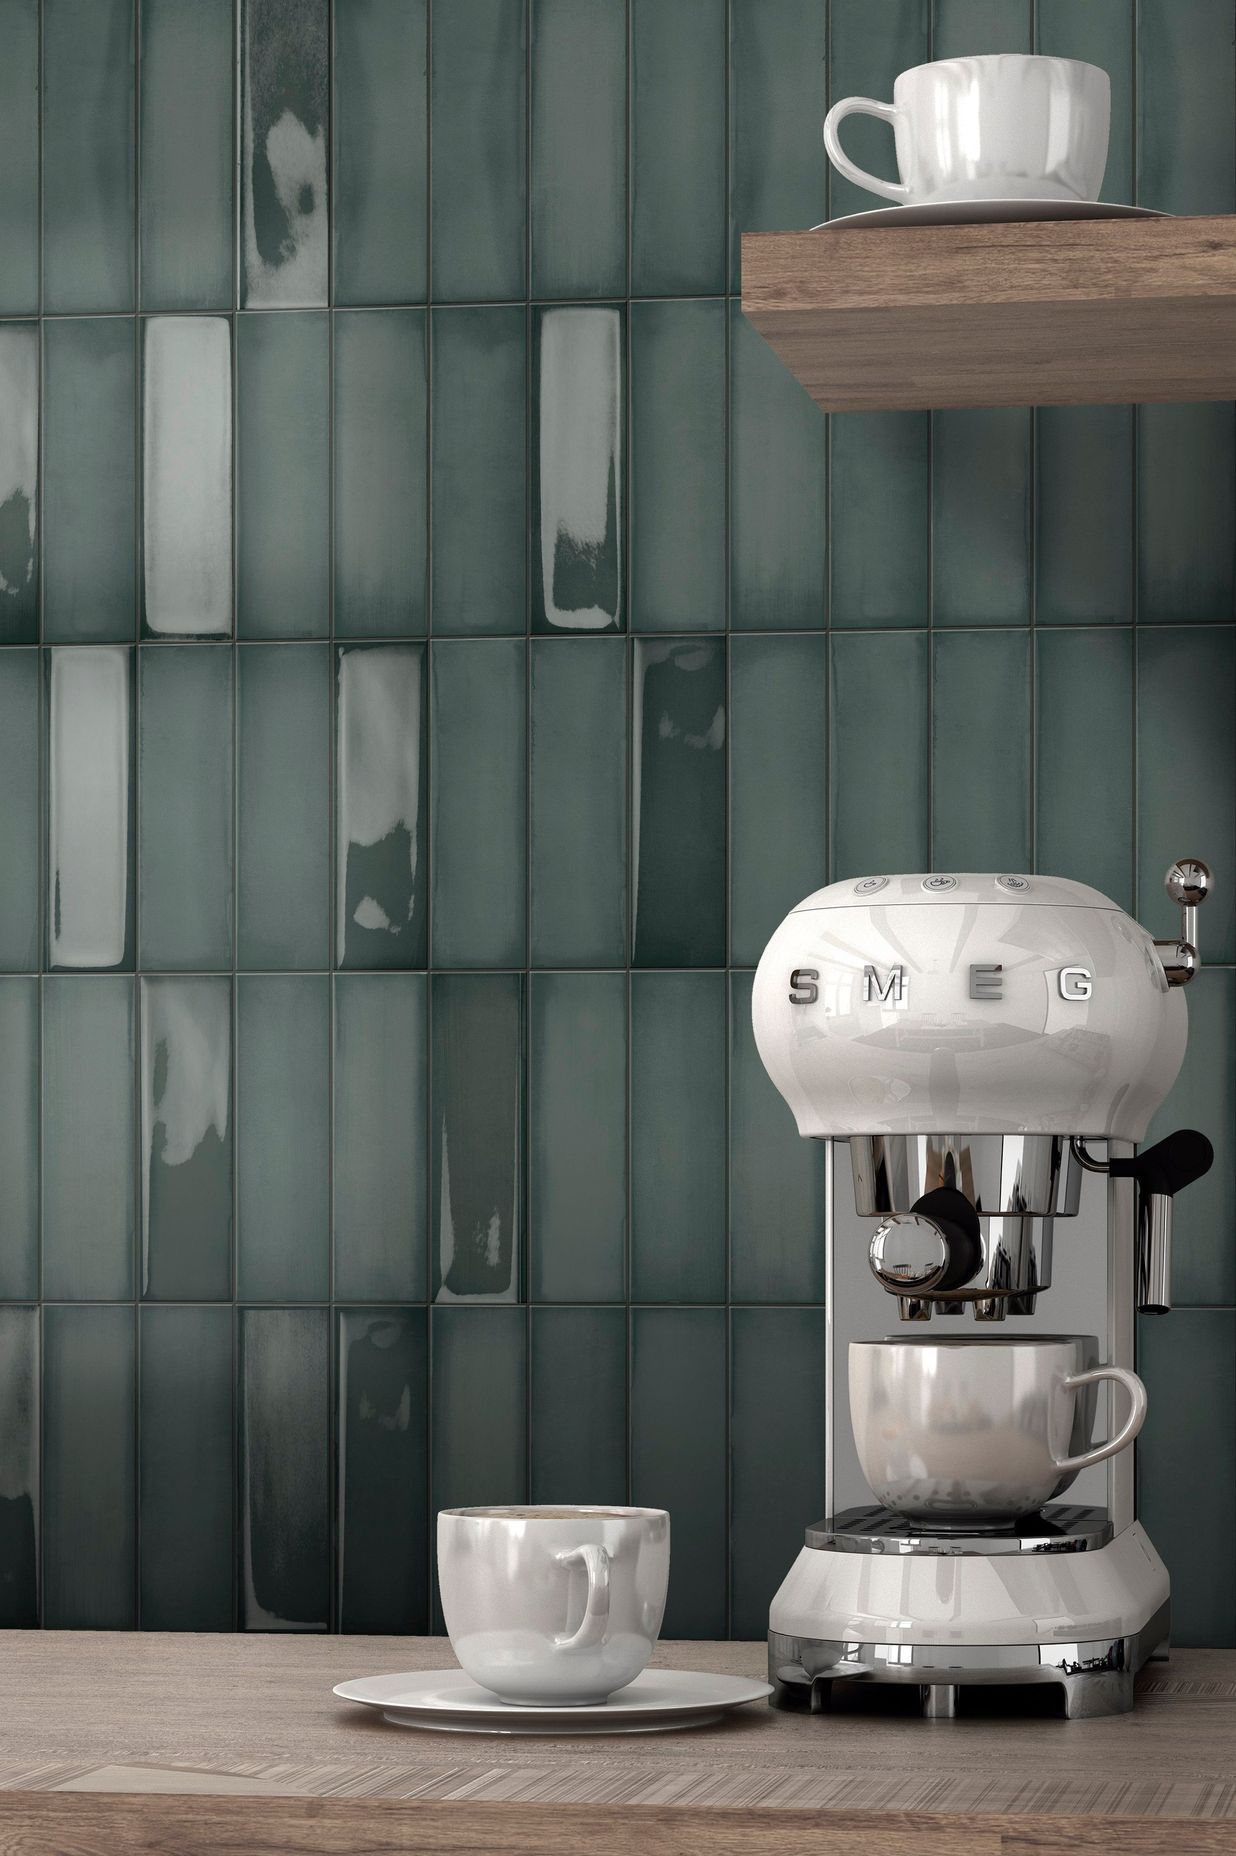 The Ghent range, a tile solution that embraces the tried and true 'brick' tiling pattern.